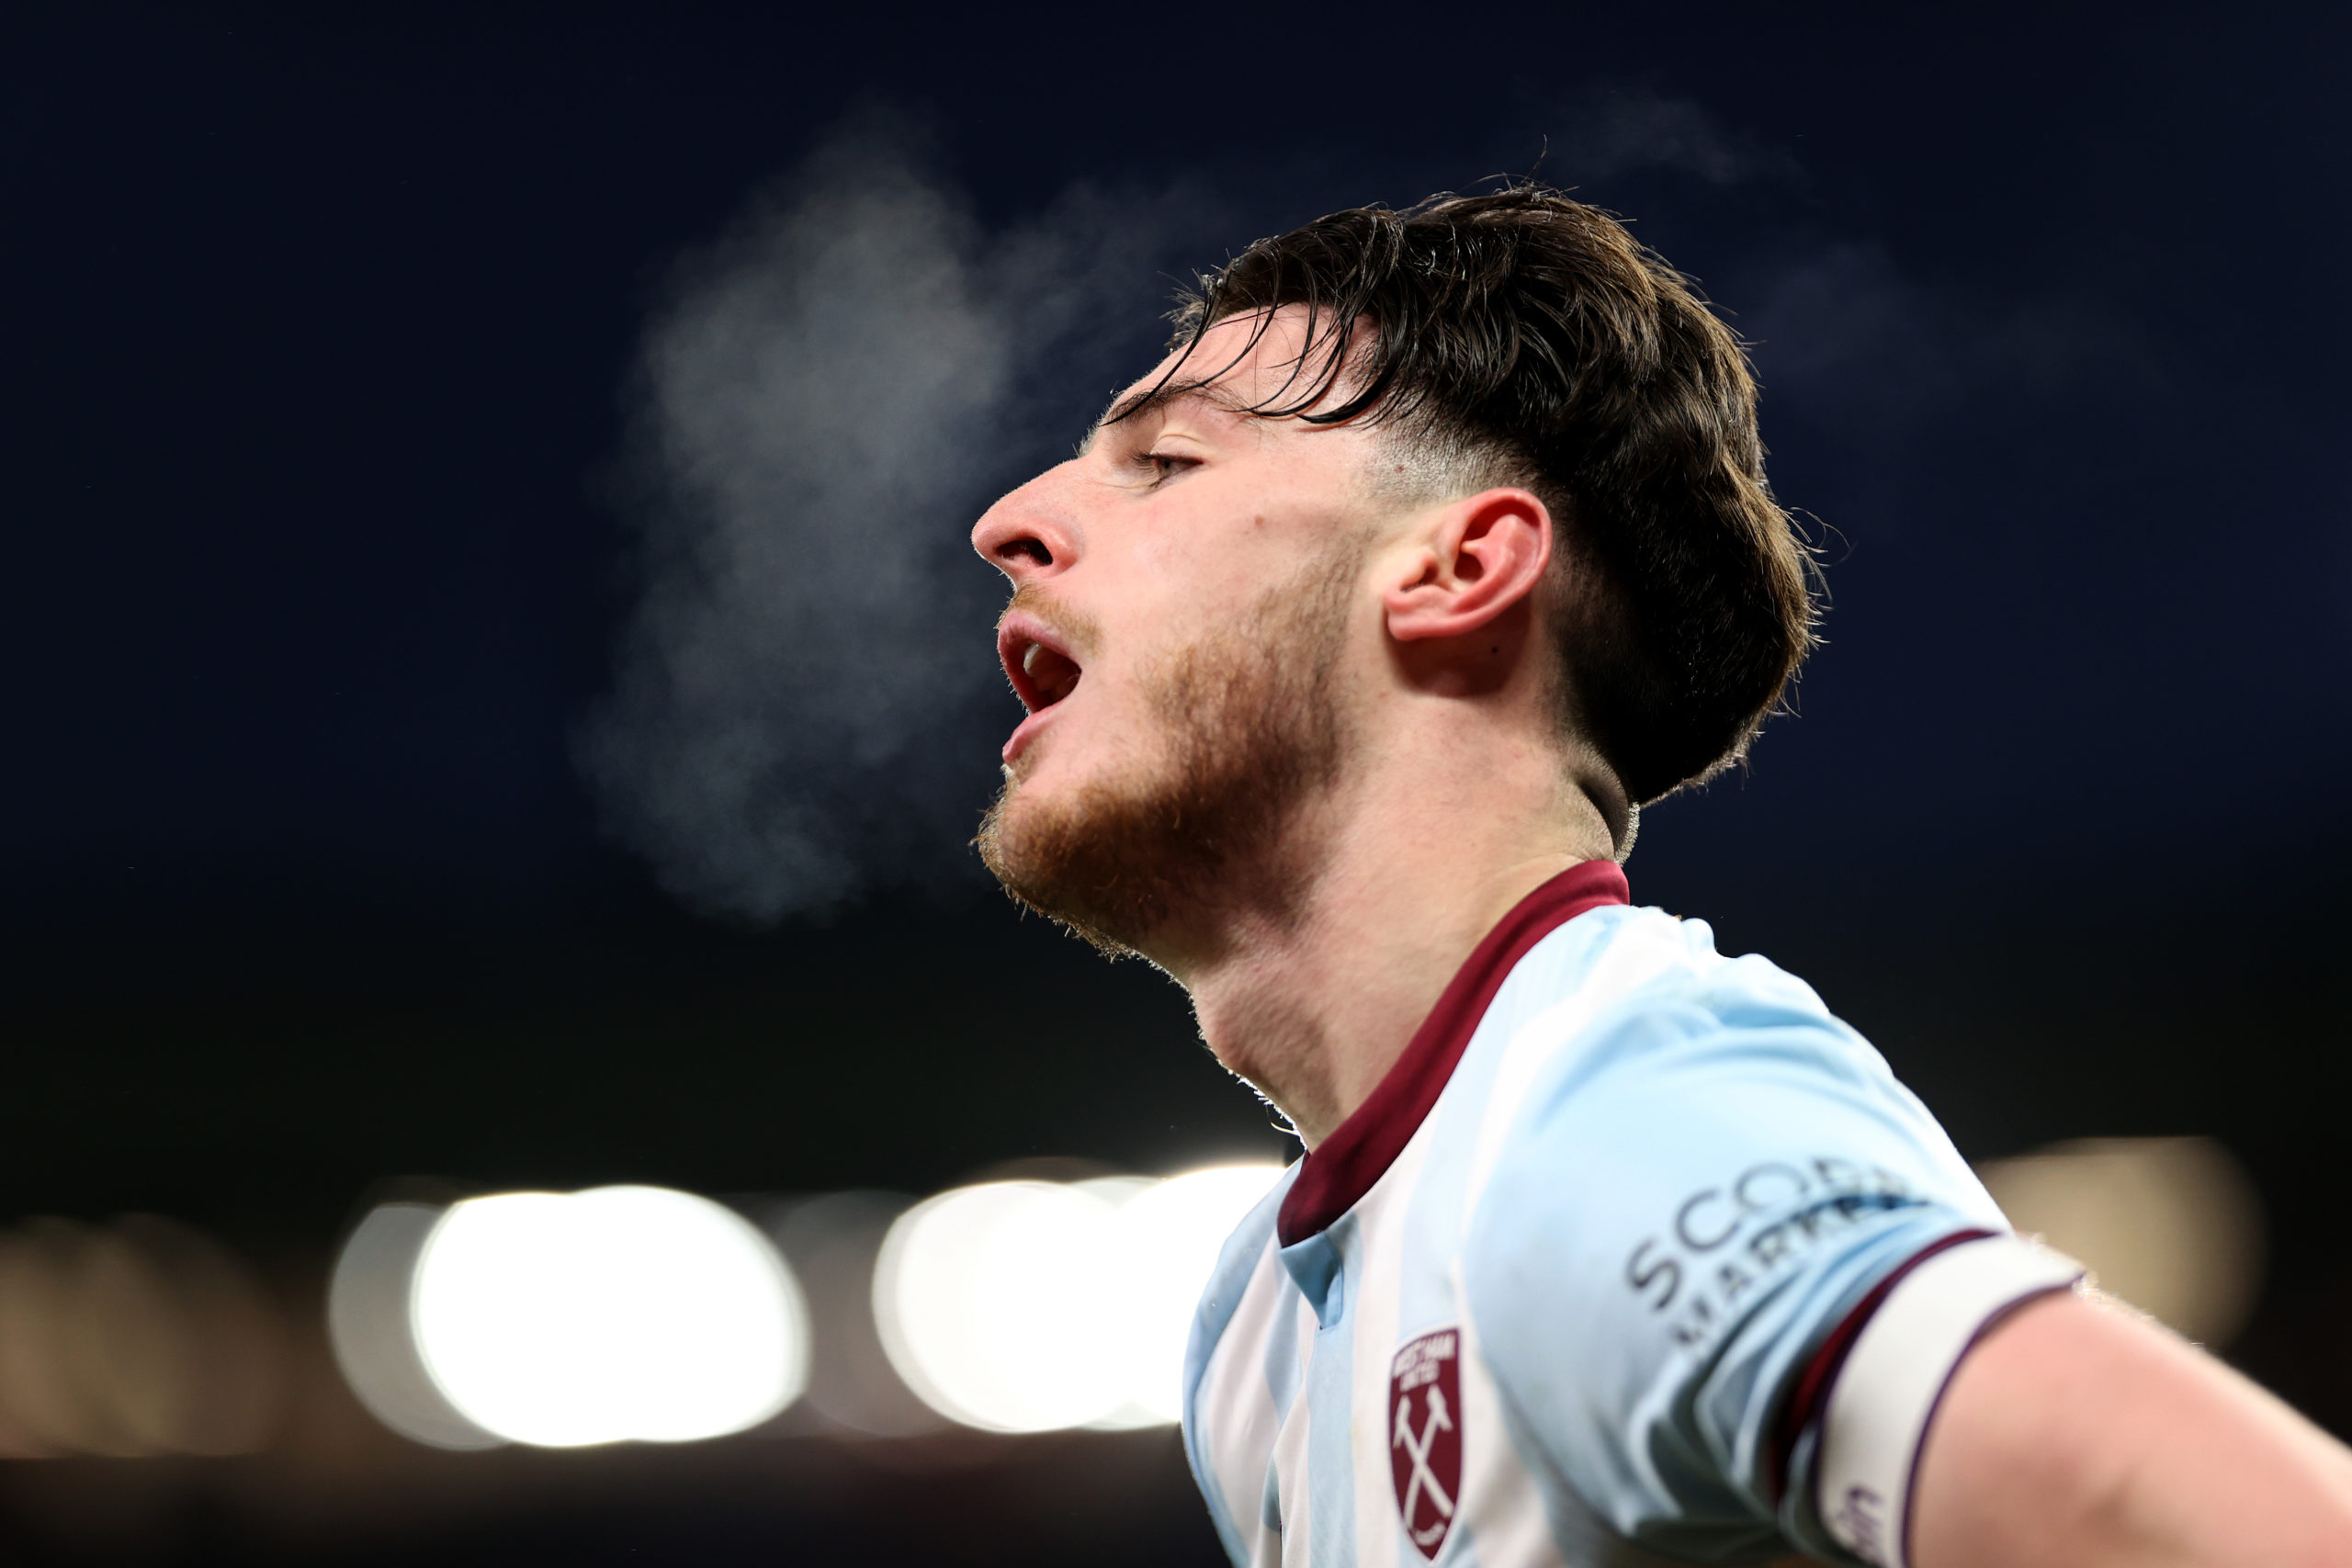 Declan Rice pictured back in West Ham training after disastrous transfer window